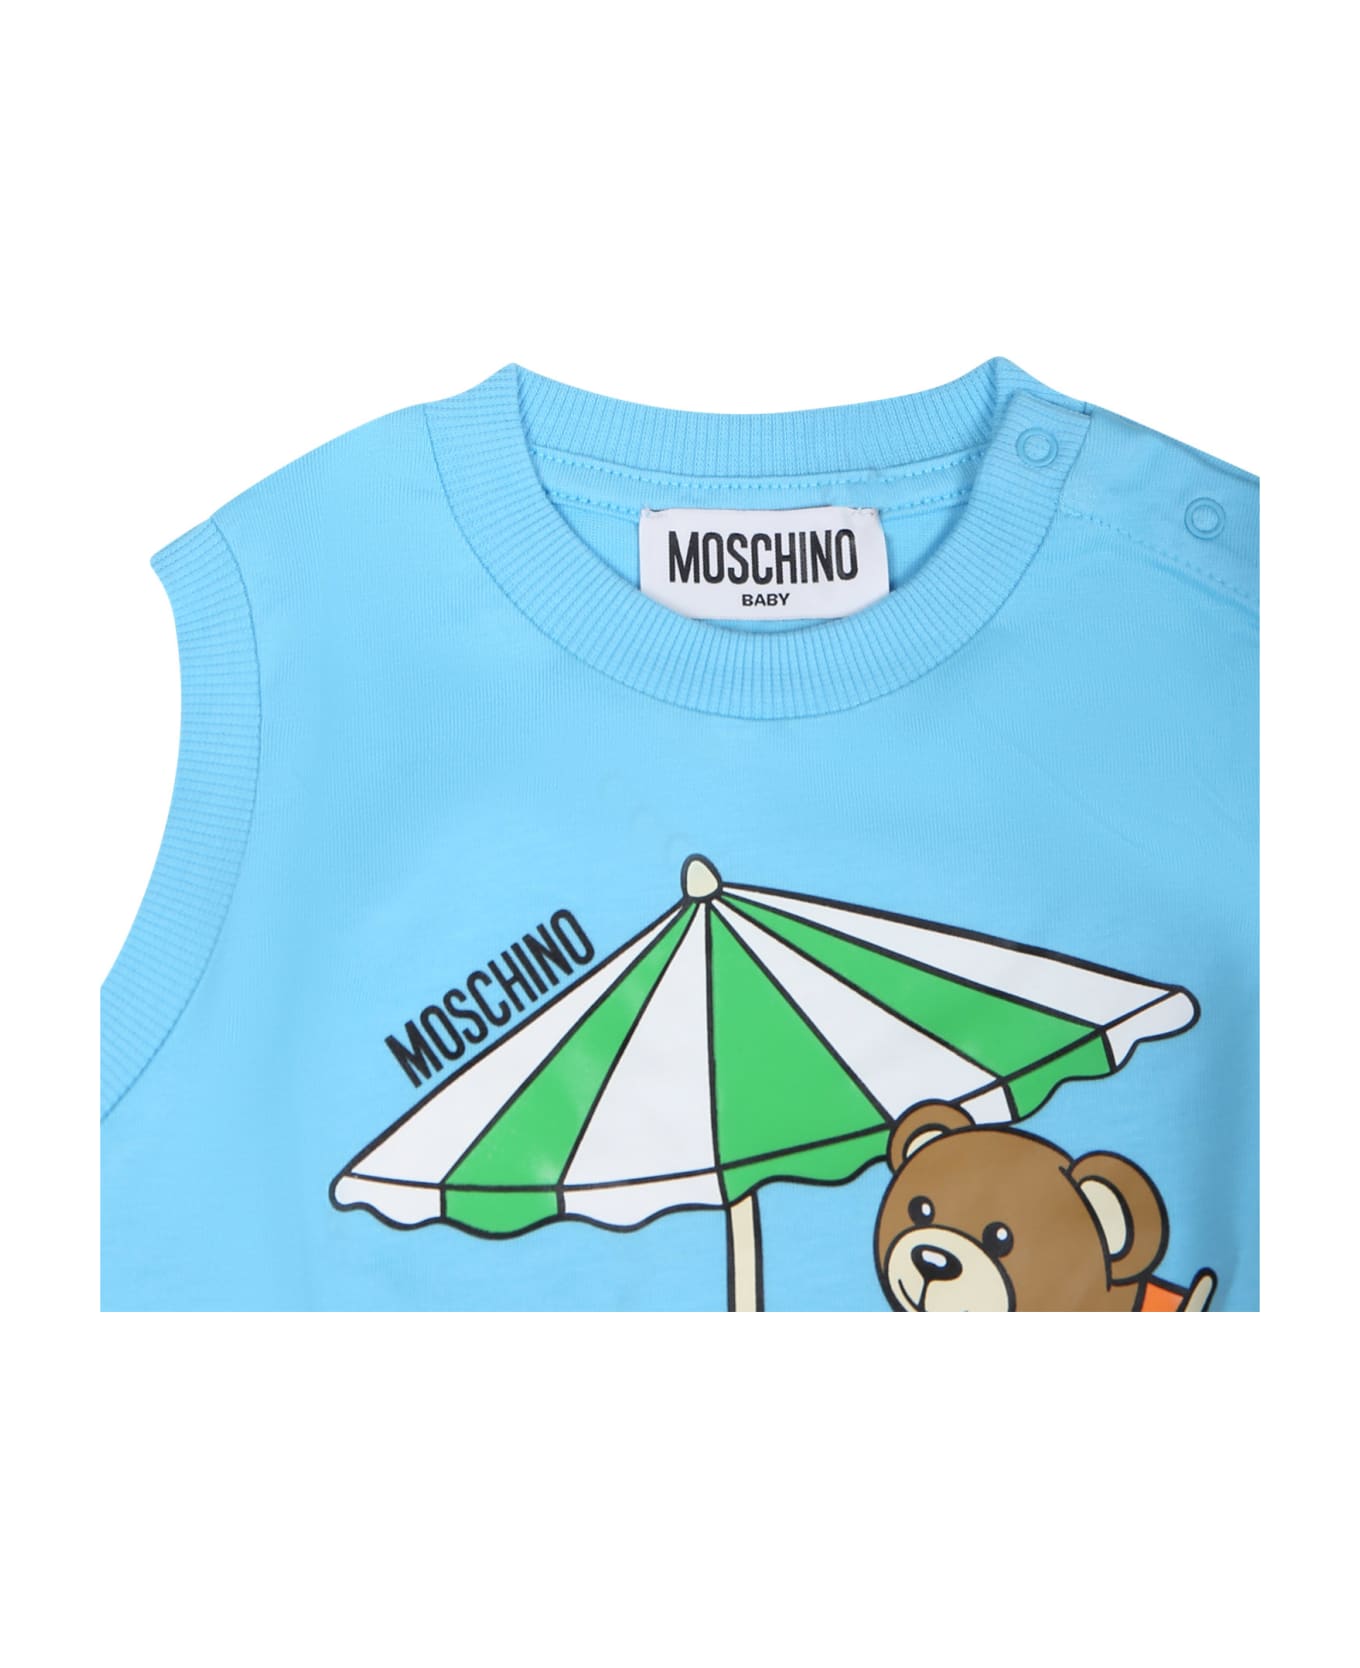 Moschino Sky Blue Sports Suit For Baby Boy With Teddy Bear - Light Blue